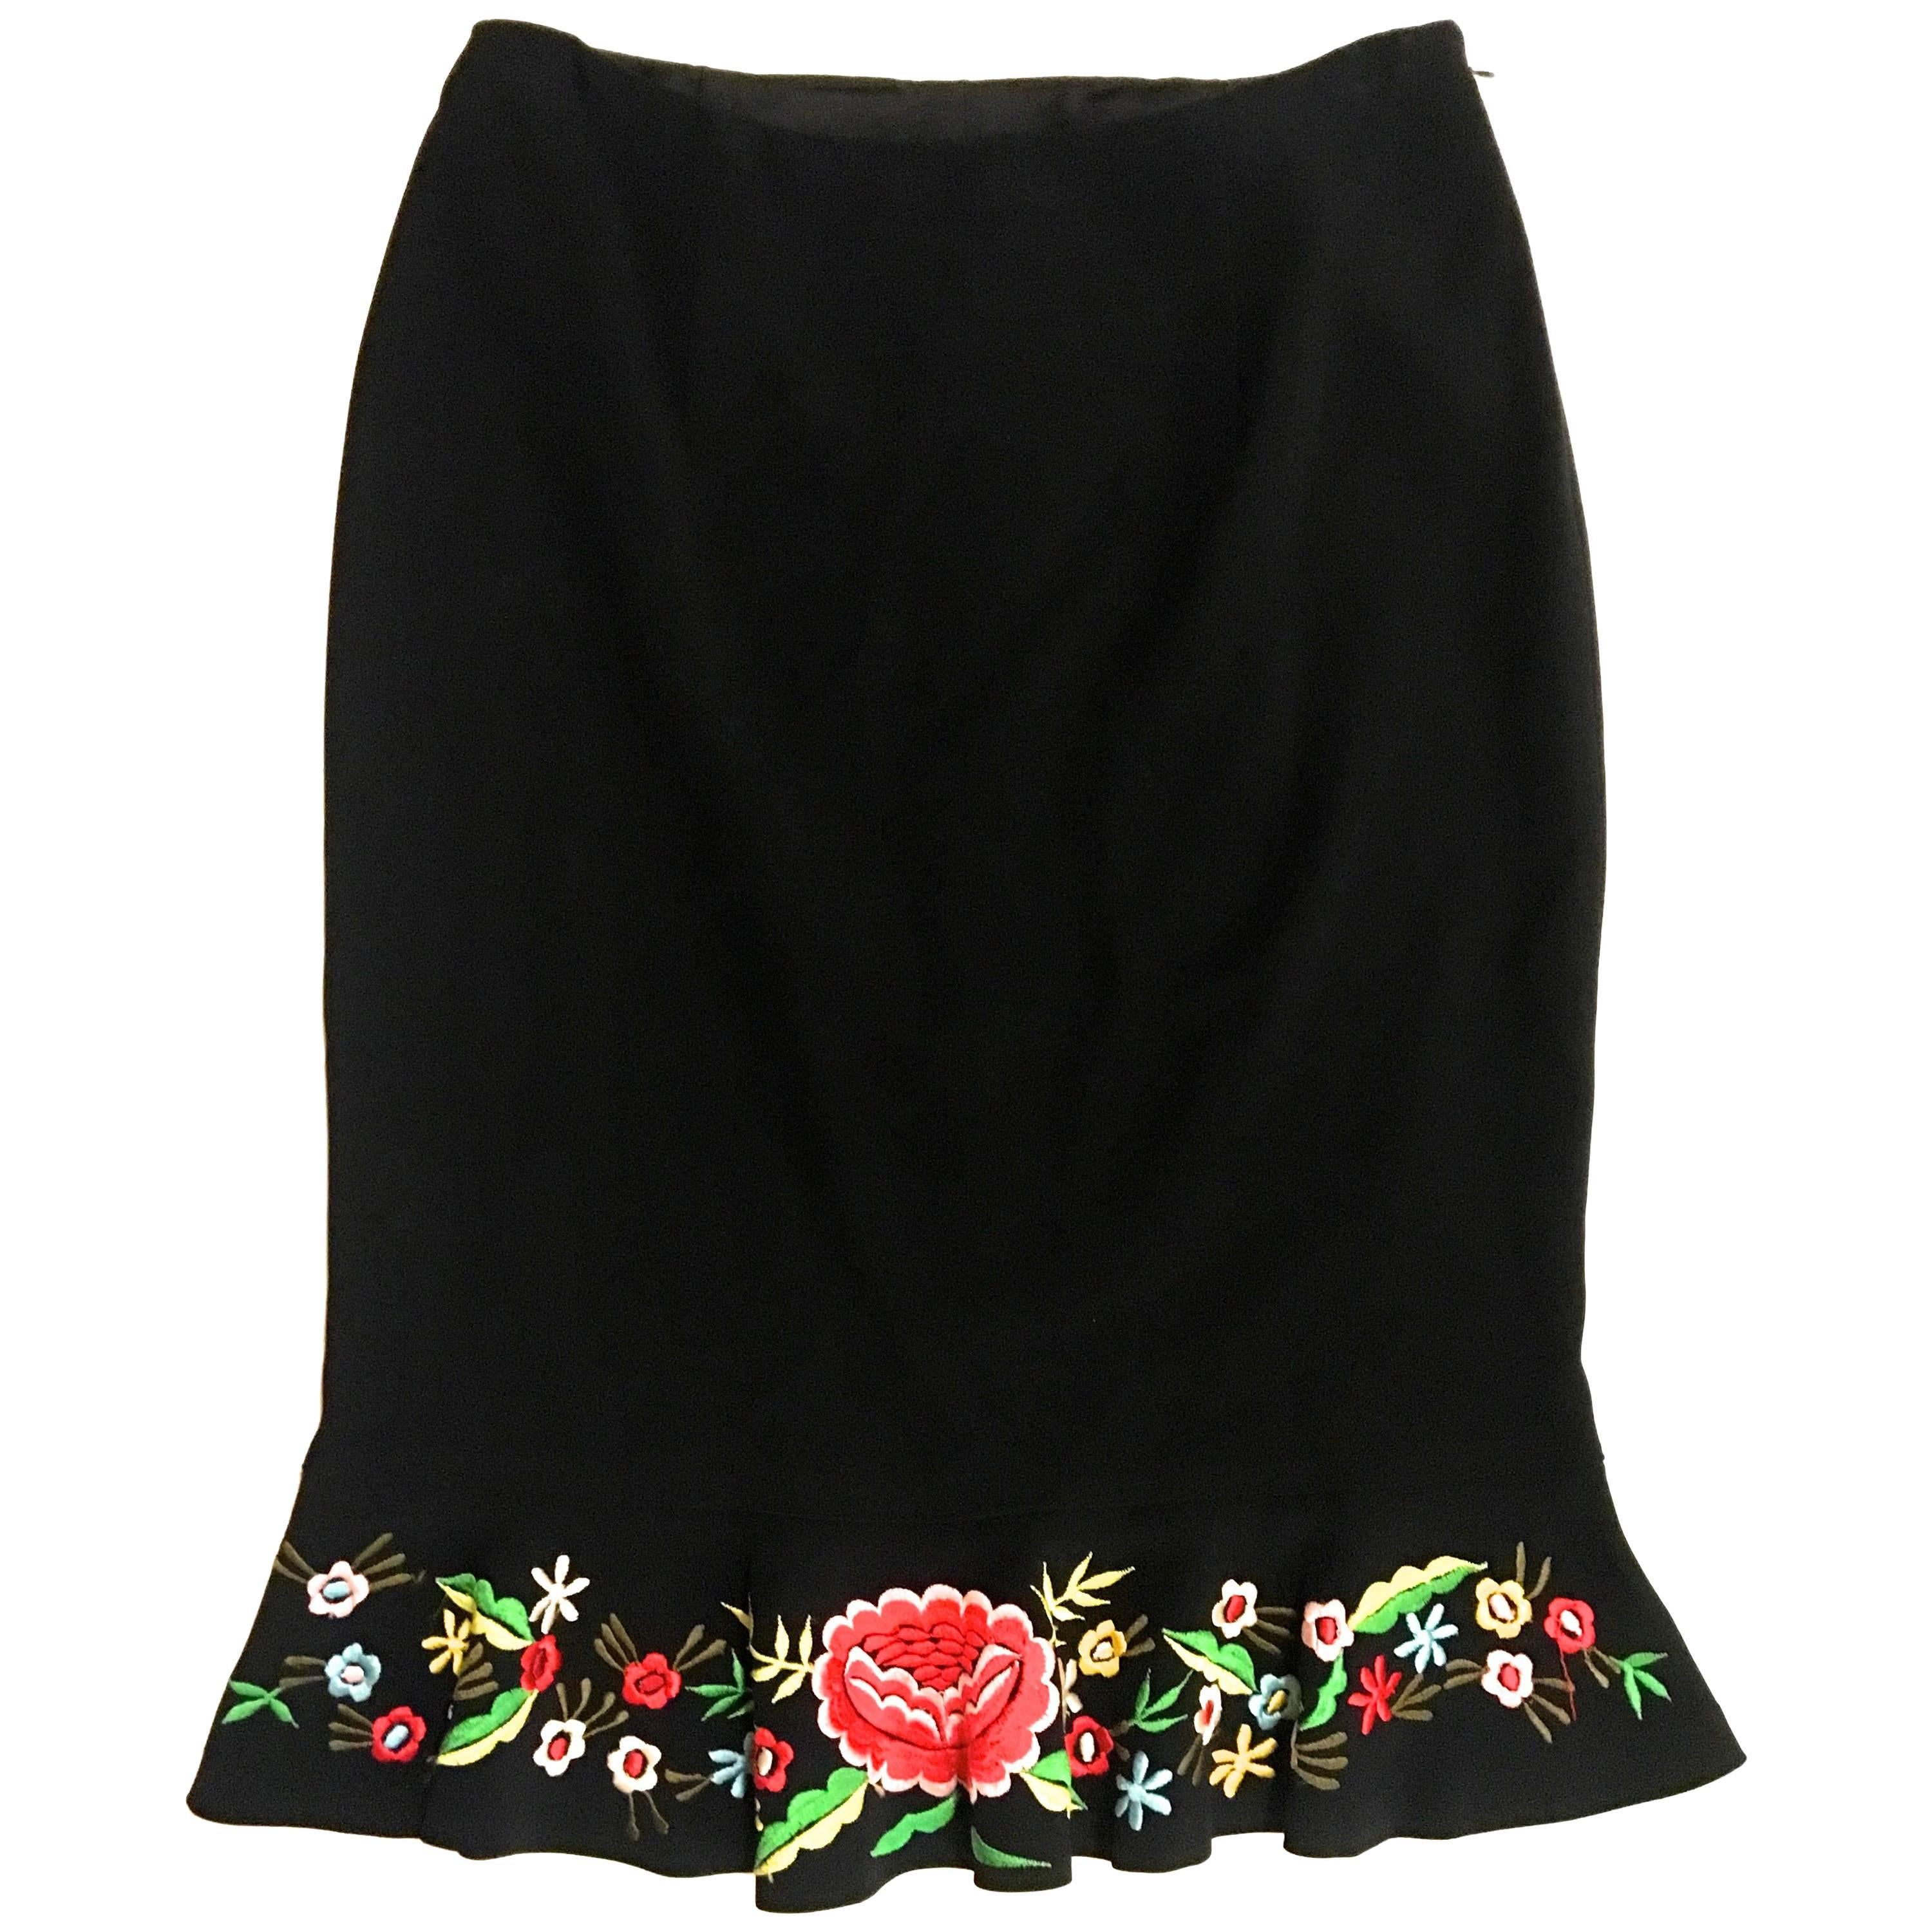 Moschino Skirt - Like New - Black  Skirt with Floral Trim For Sale